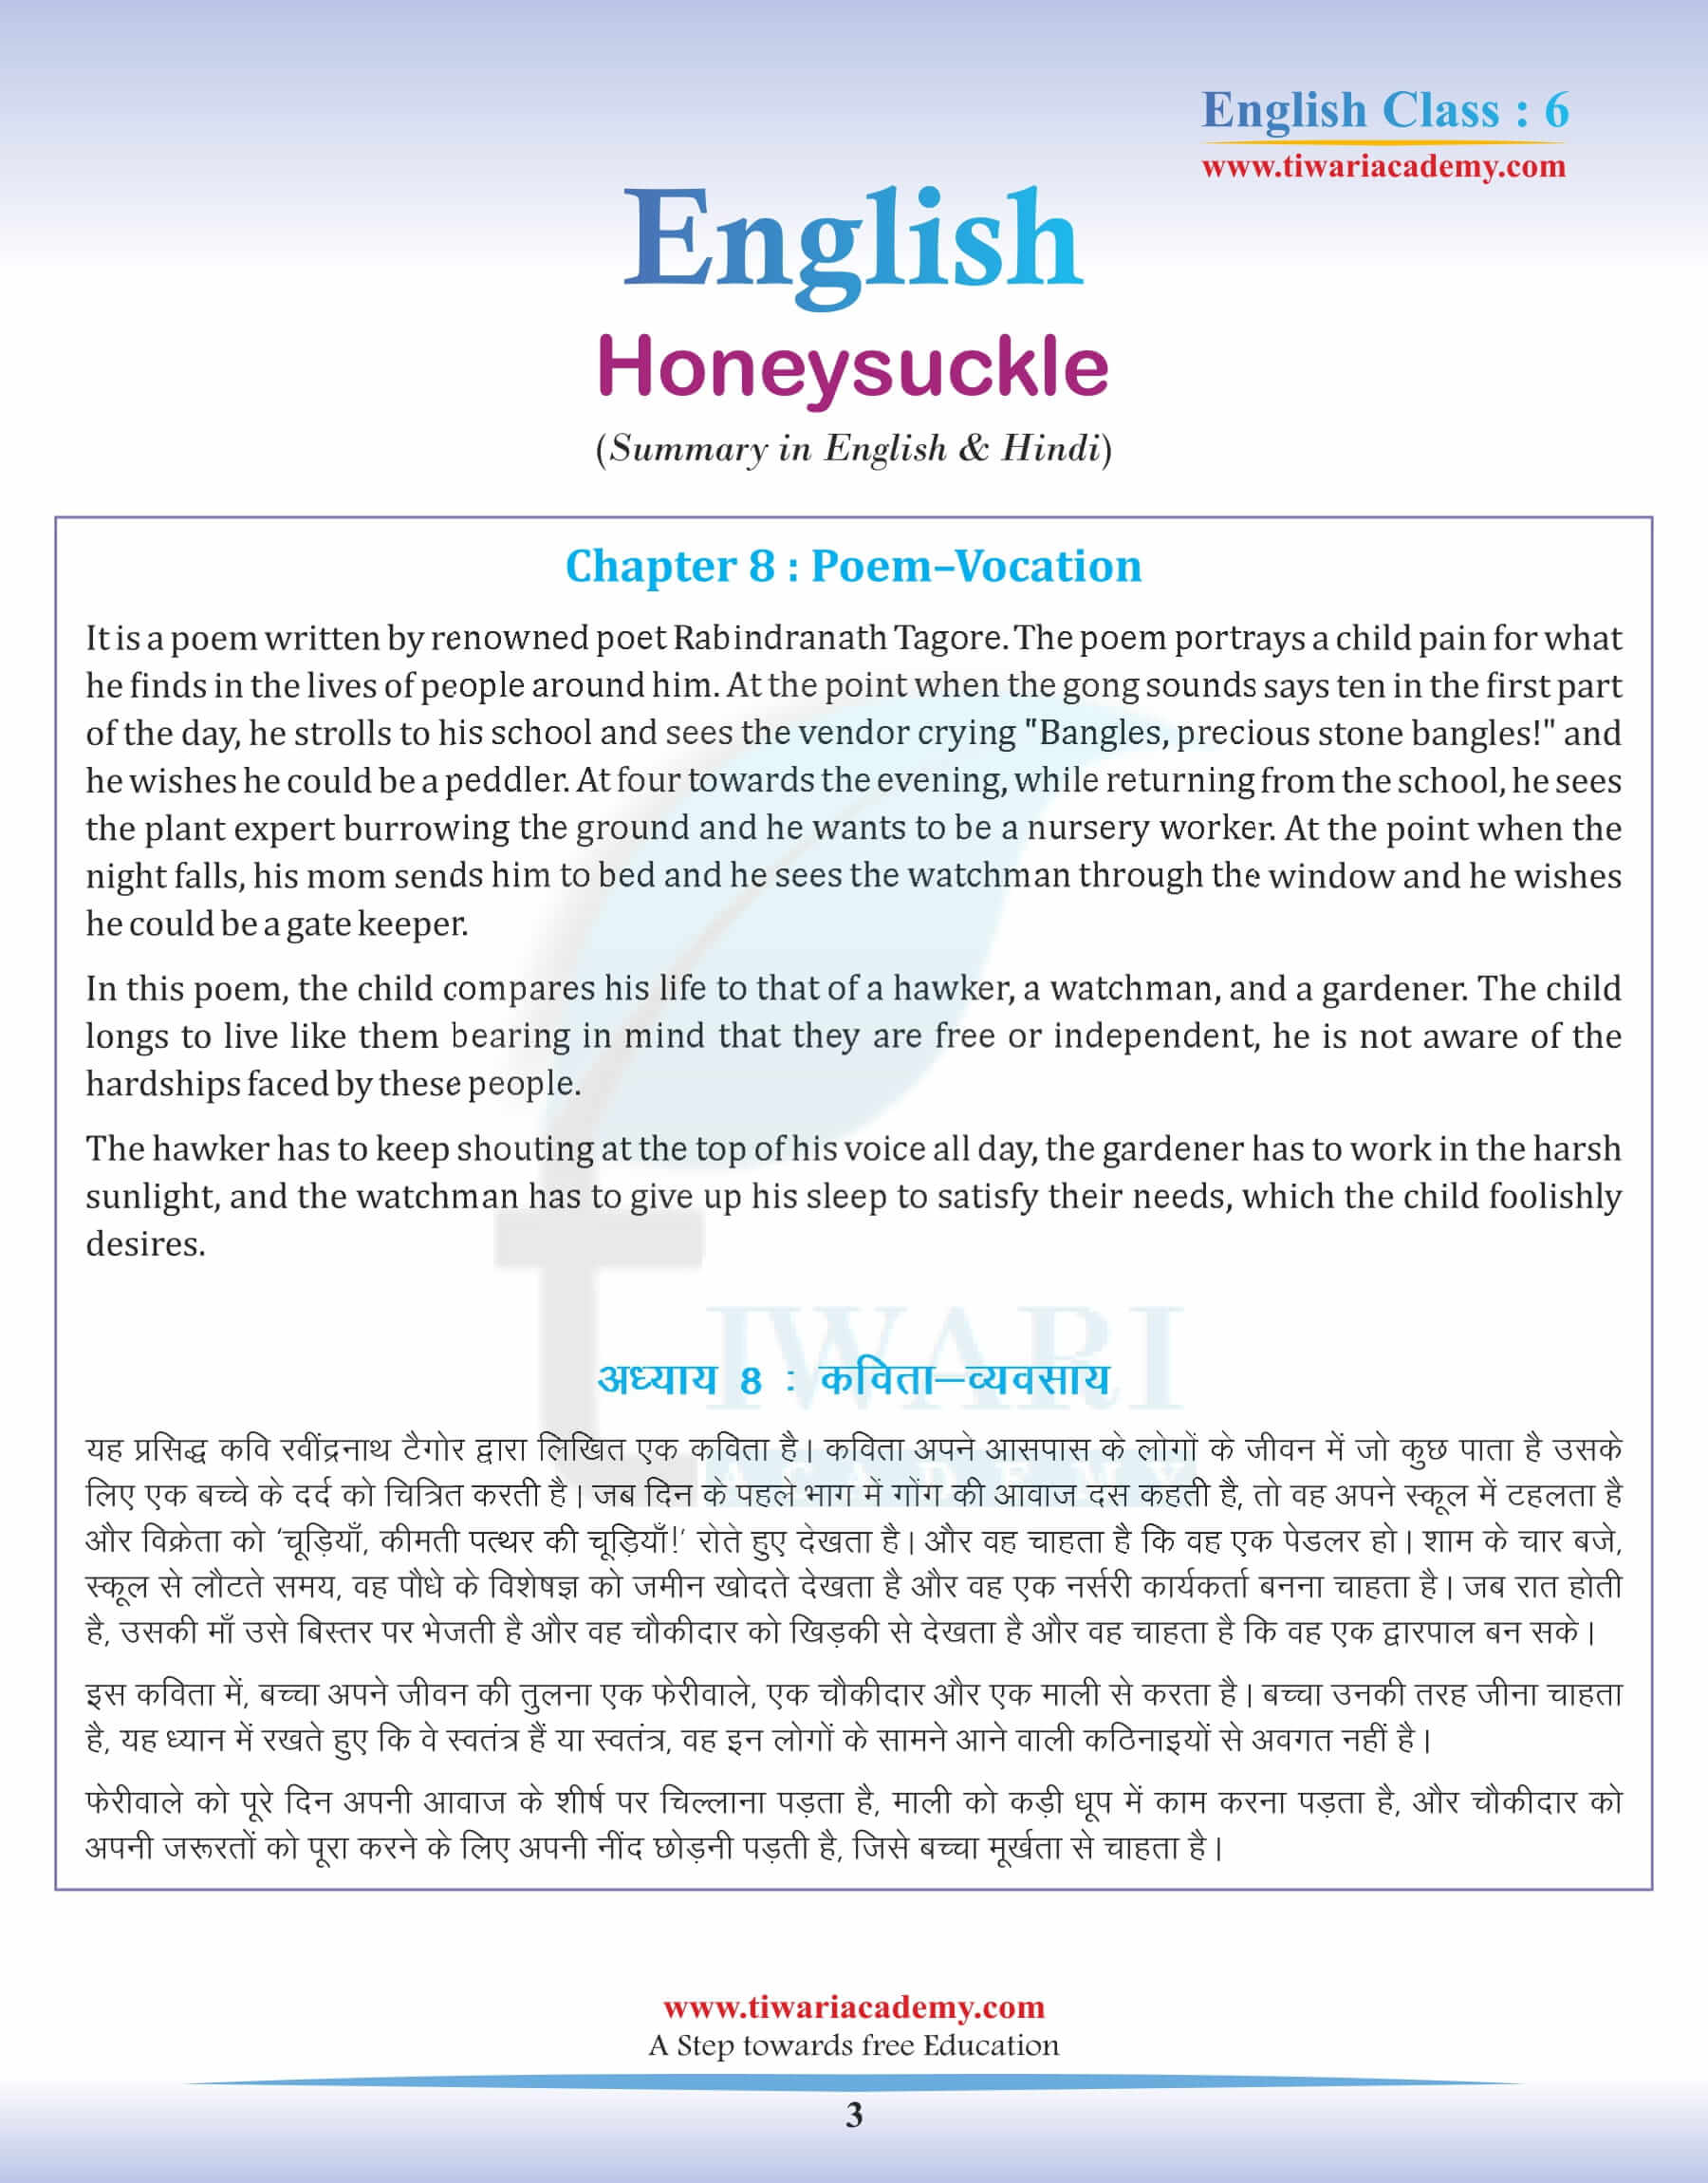 Class 6 English Chapter 8 Summary in Hindi and English